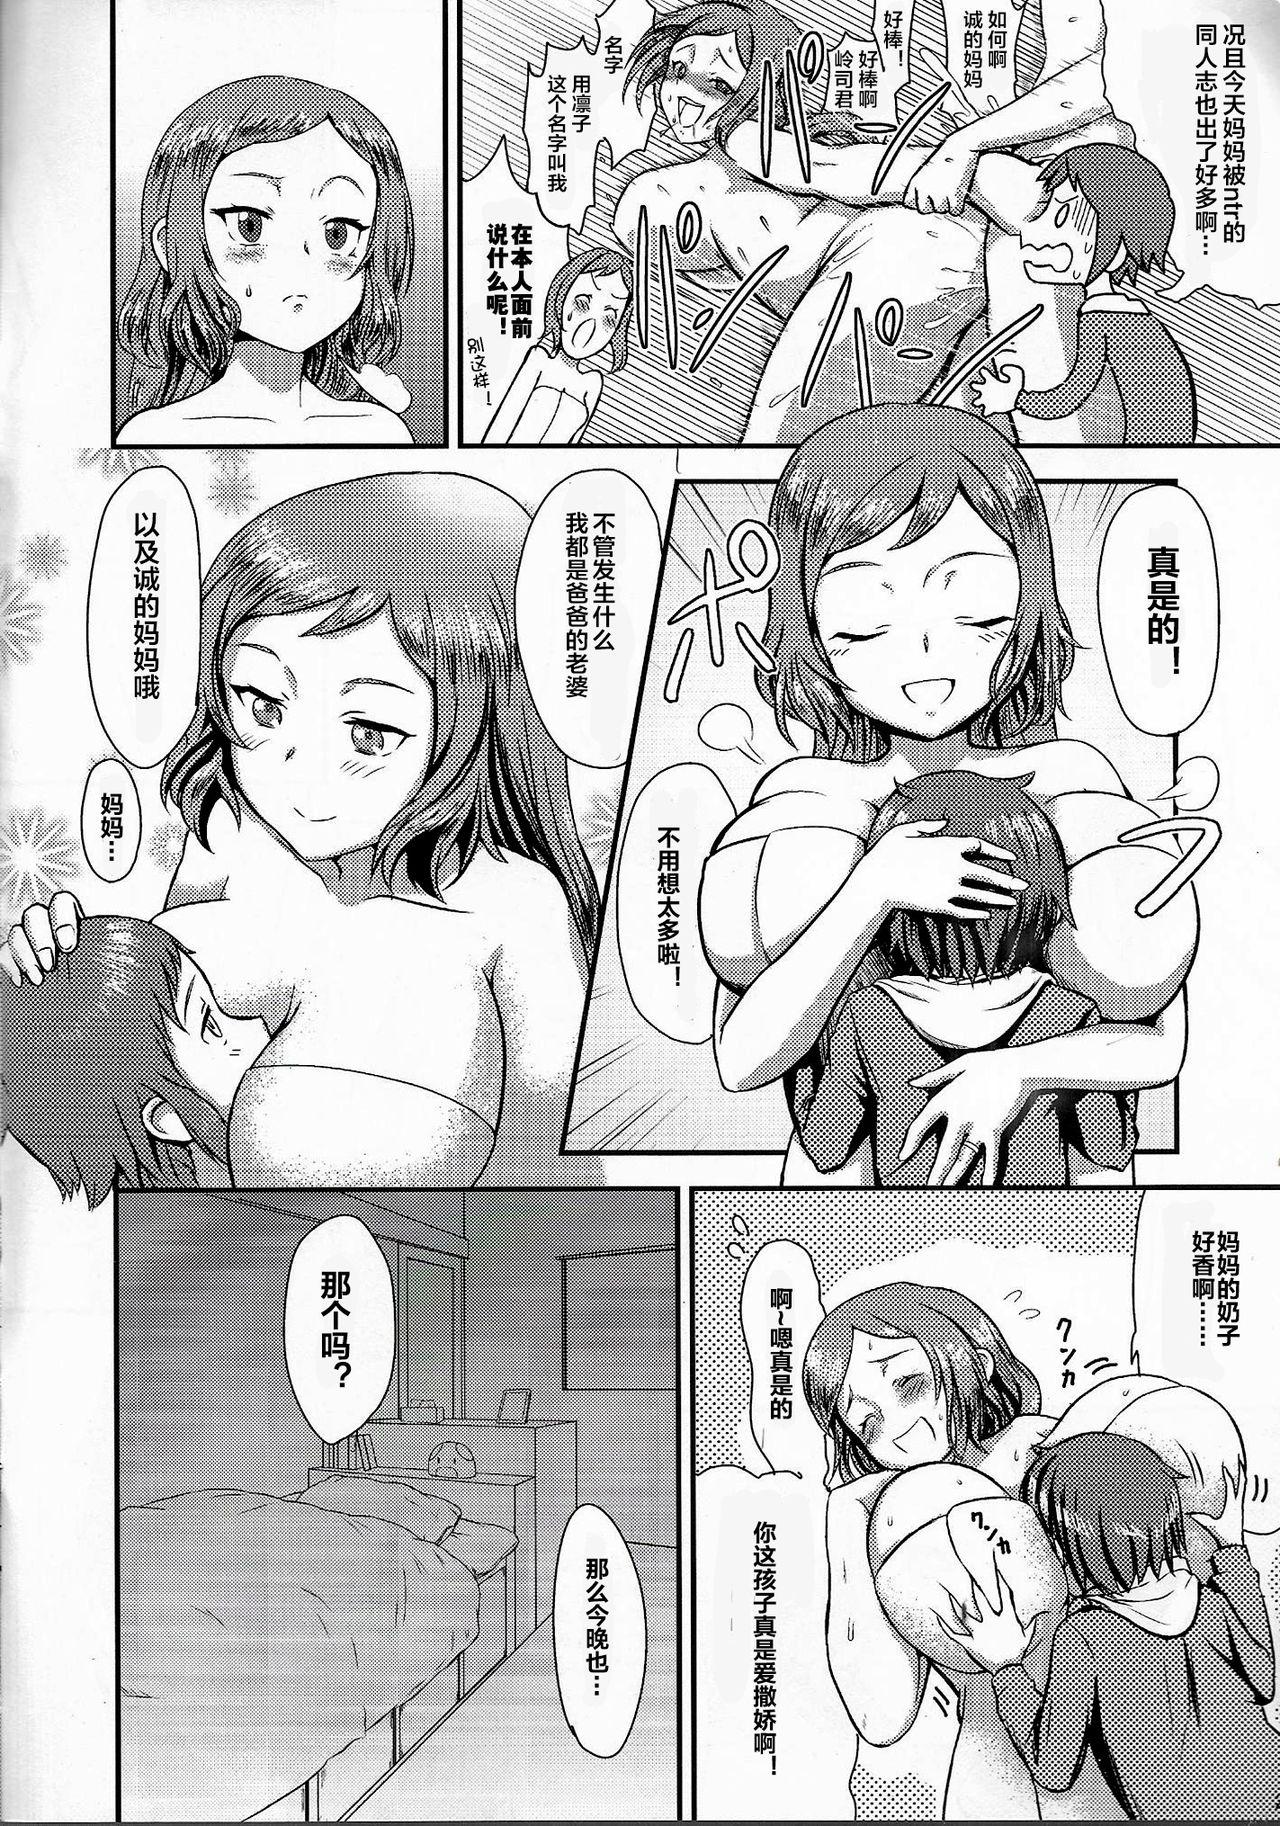 Sexy Girl Rinko Mama to Nyan x2 shitaai!! - Gundam build fighters Gay Trimmed - Page 3